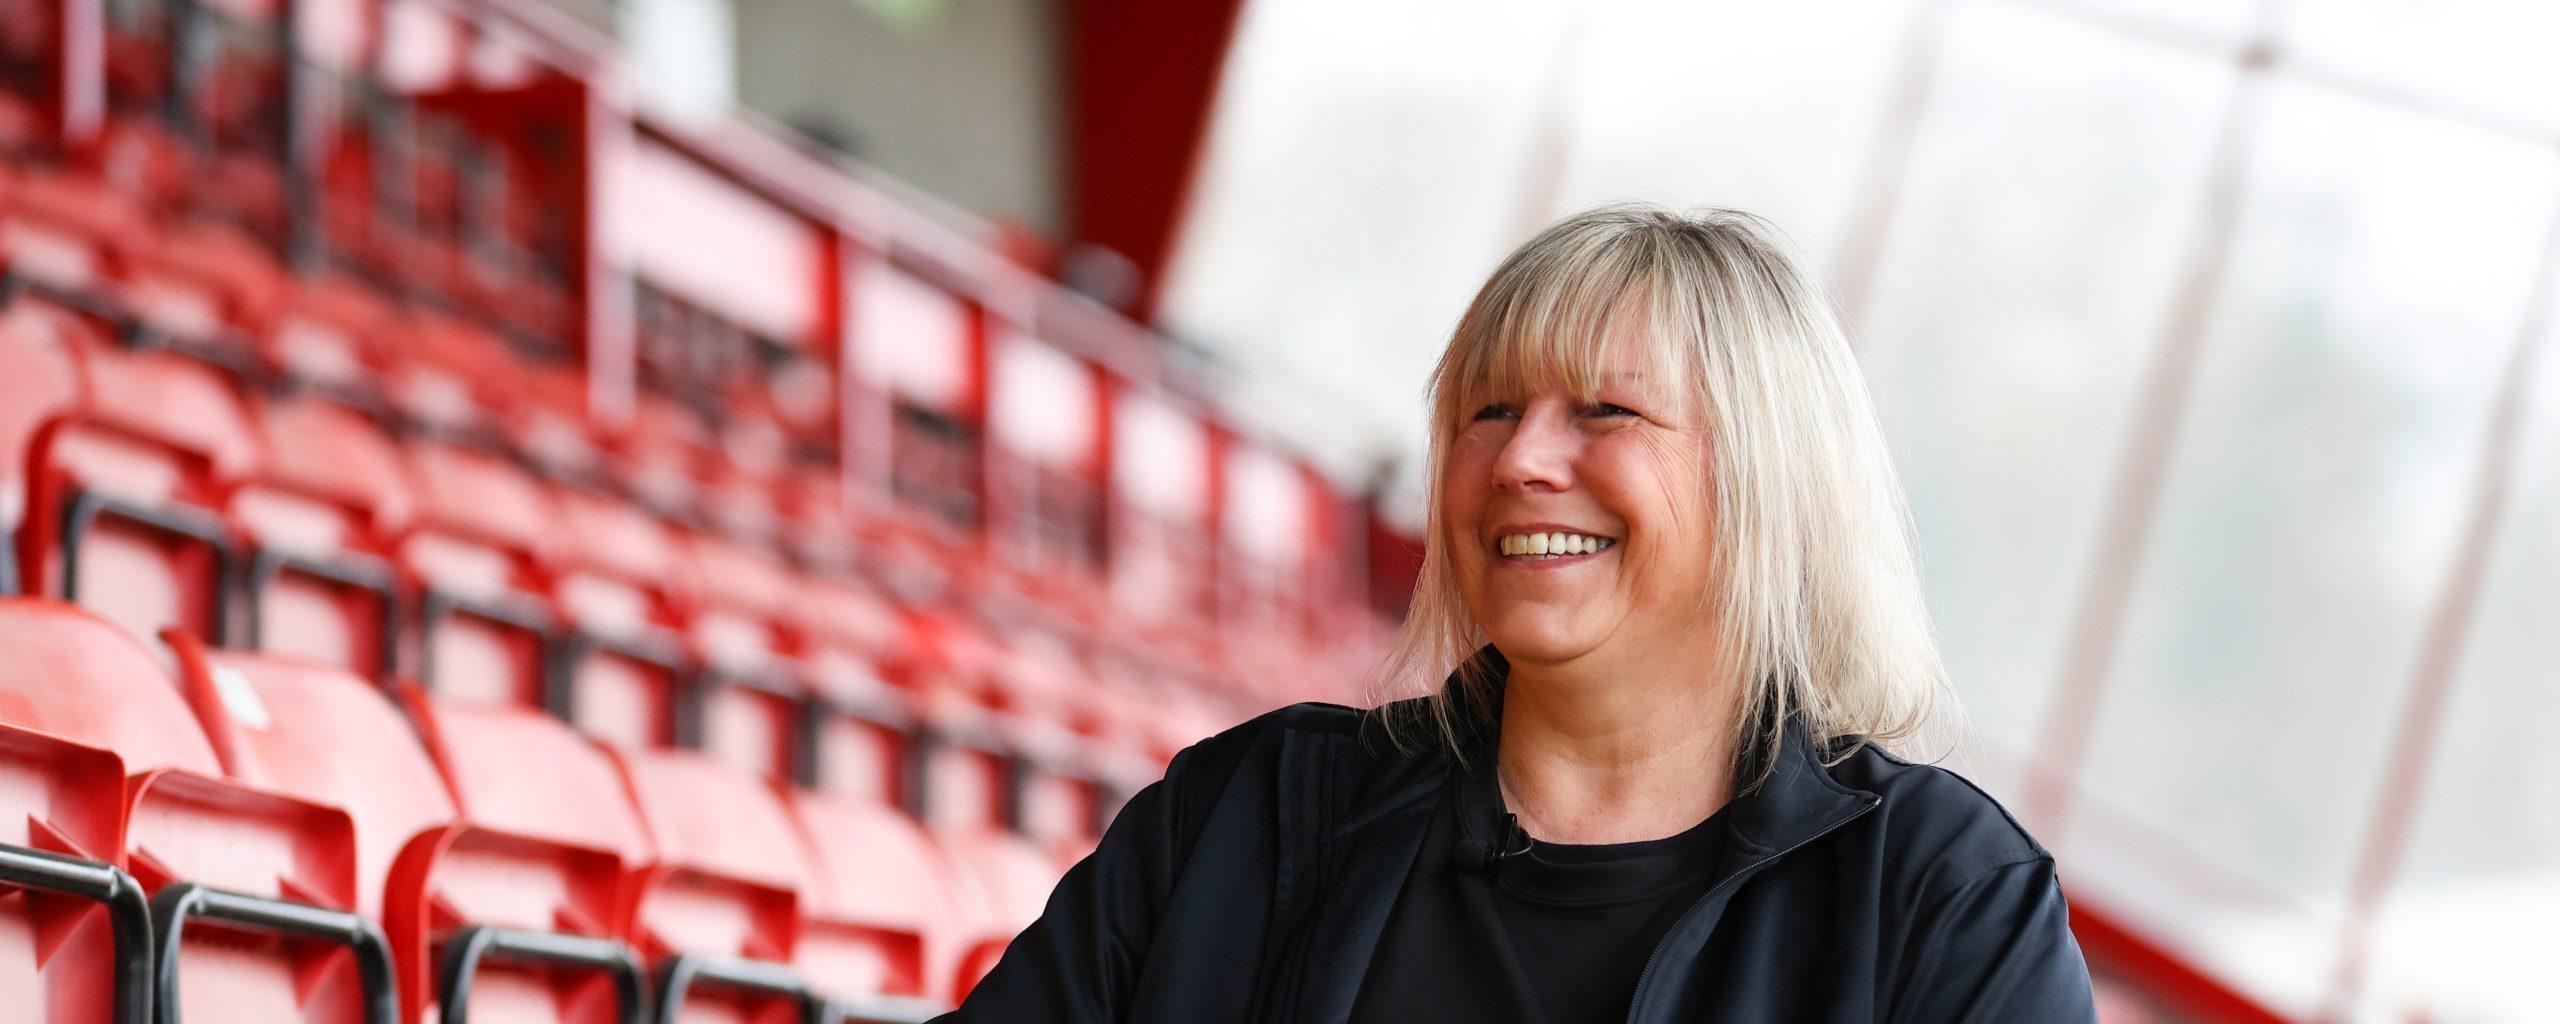 A white woman aged 50-55 sat in football stands smiling